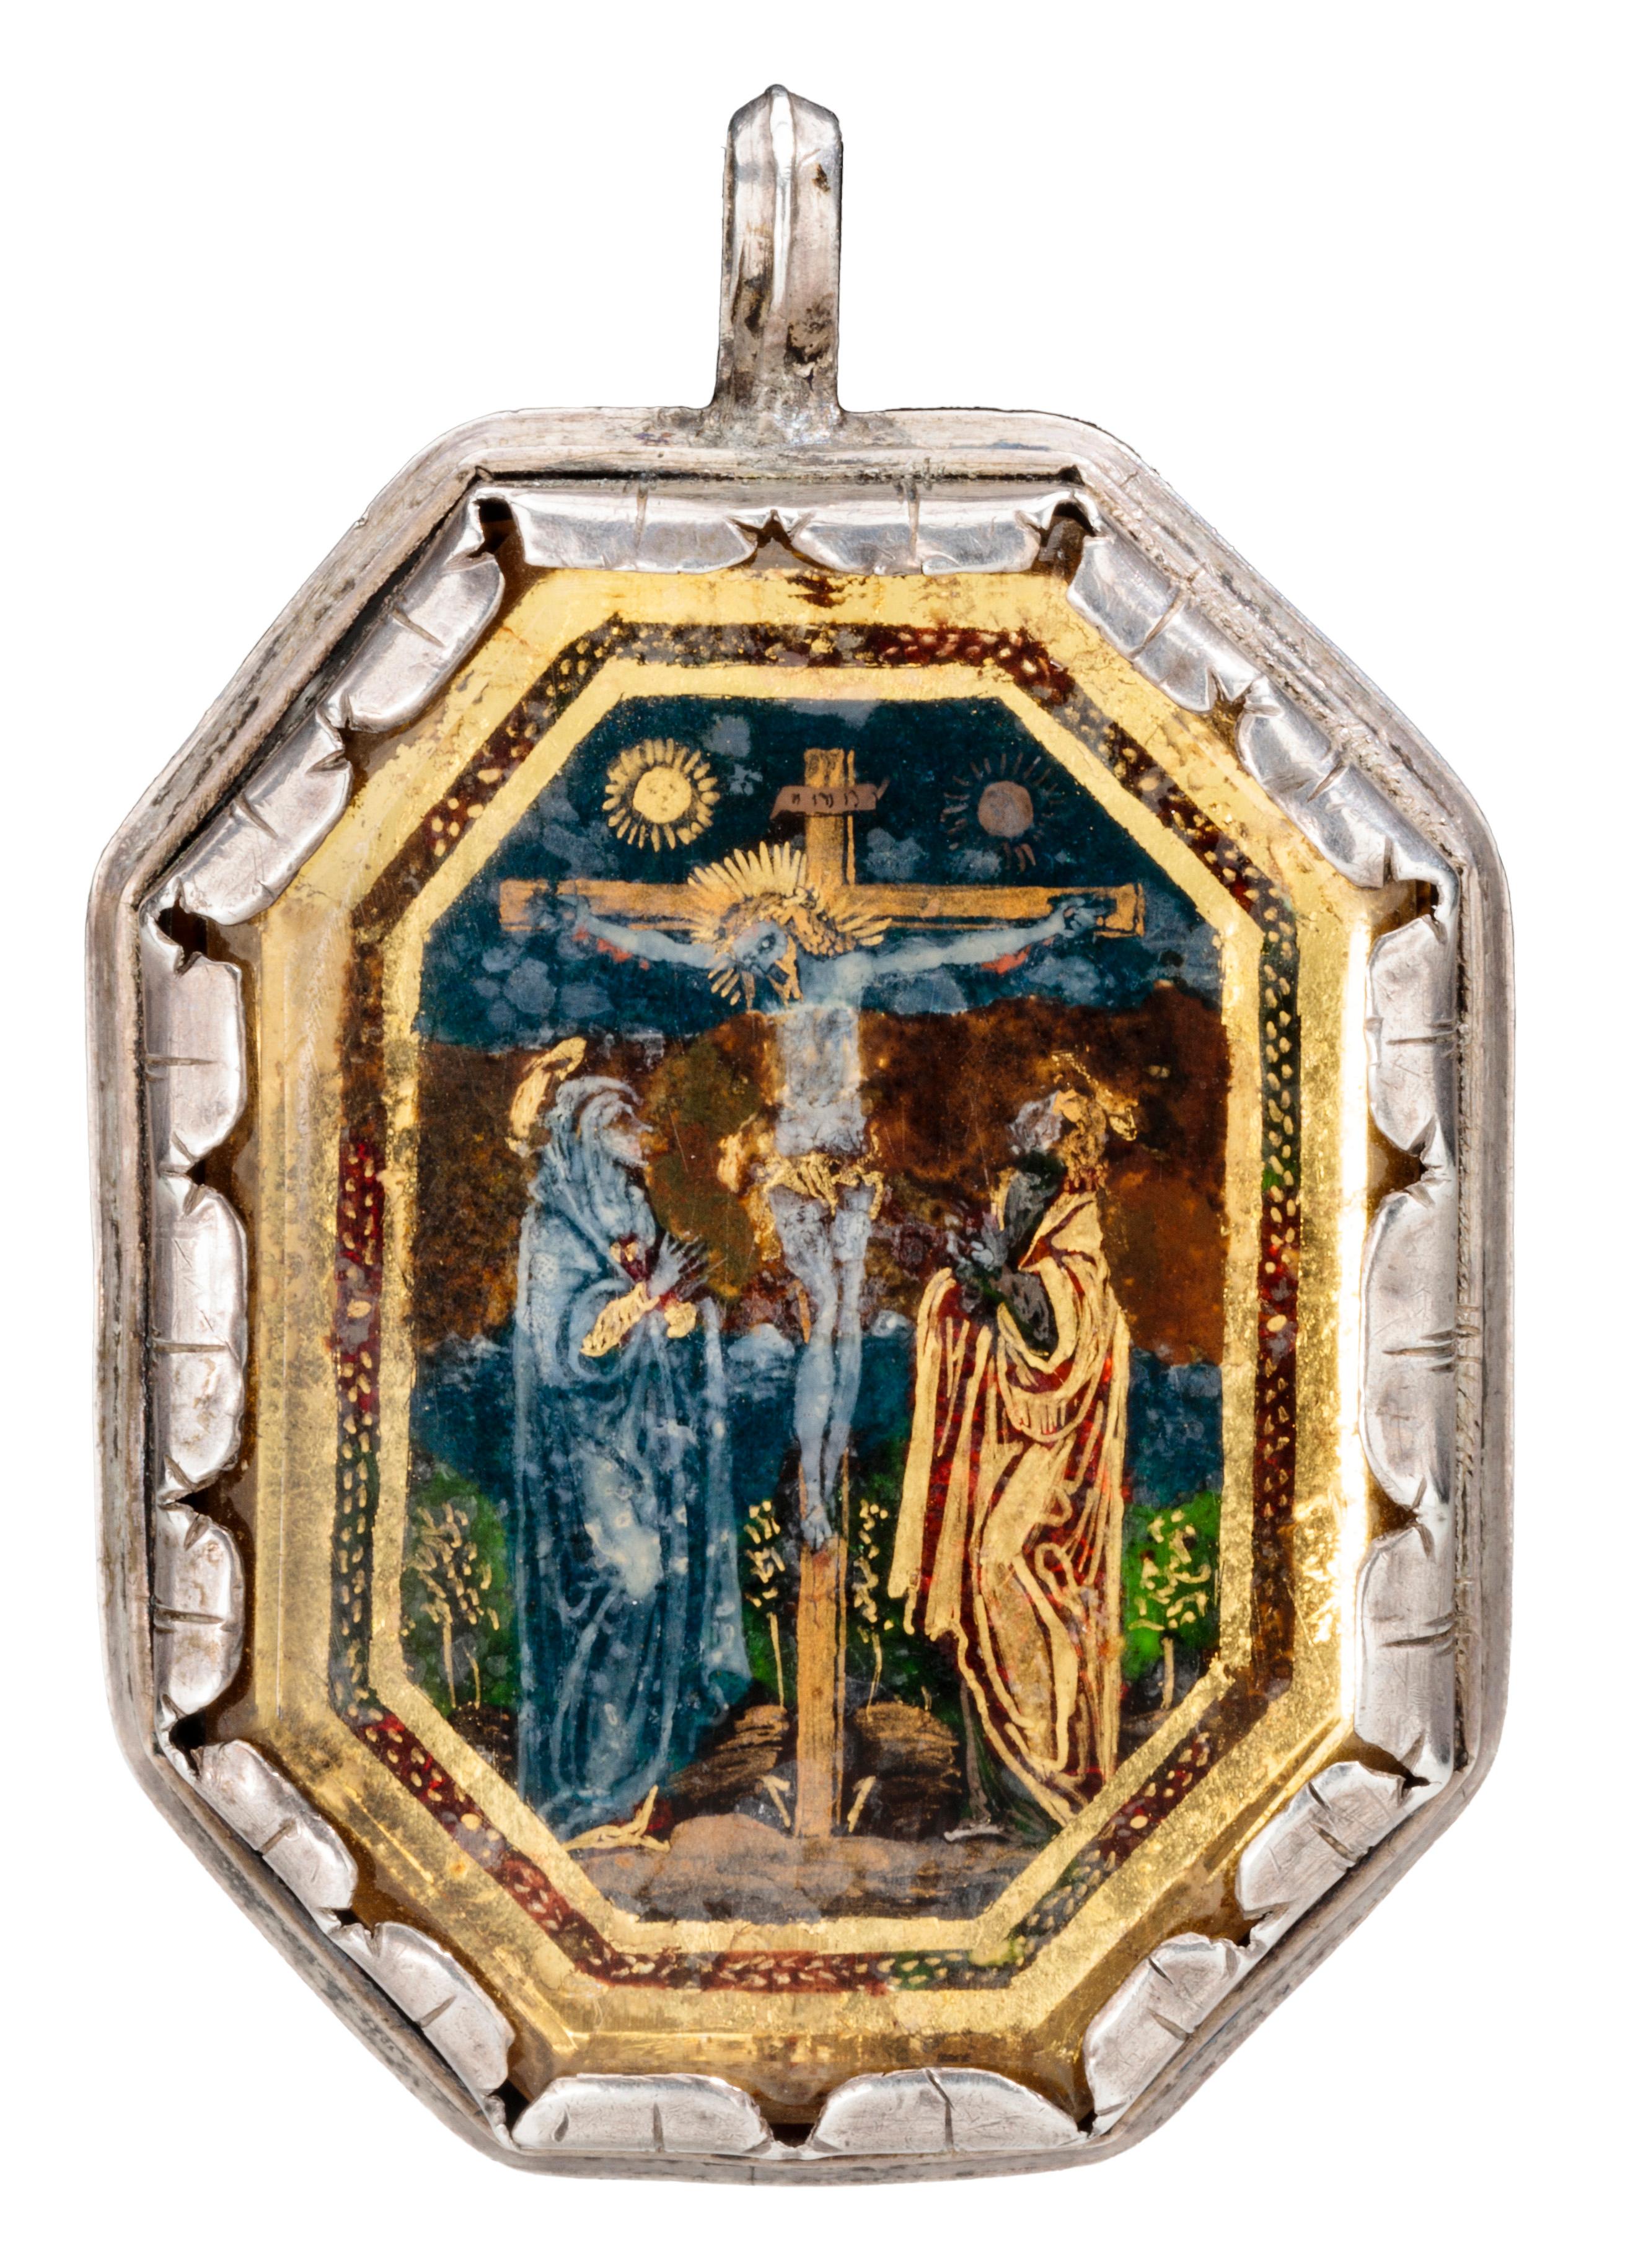 PENDANT WITH THE CRUCIFIXION AND ST. JOHN THE BAPTIST  
Italy (Lombardy), c. 1550–80  
Silver rock crystal, gold foil, verre églomisé  
Weight 23.7 grams; dimensions 47 × 32 × 10 mm

Double-sided octagonal pendant with two verre églomisé plaques